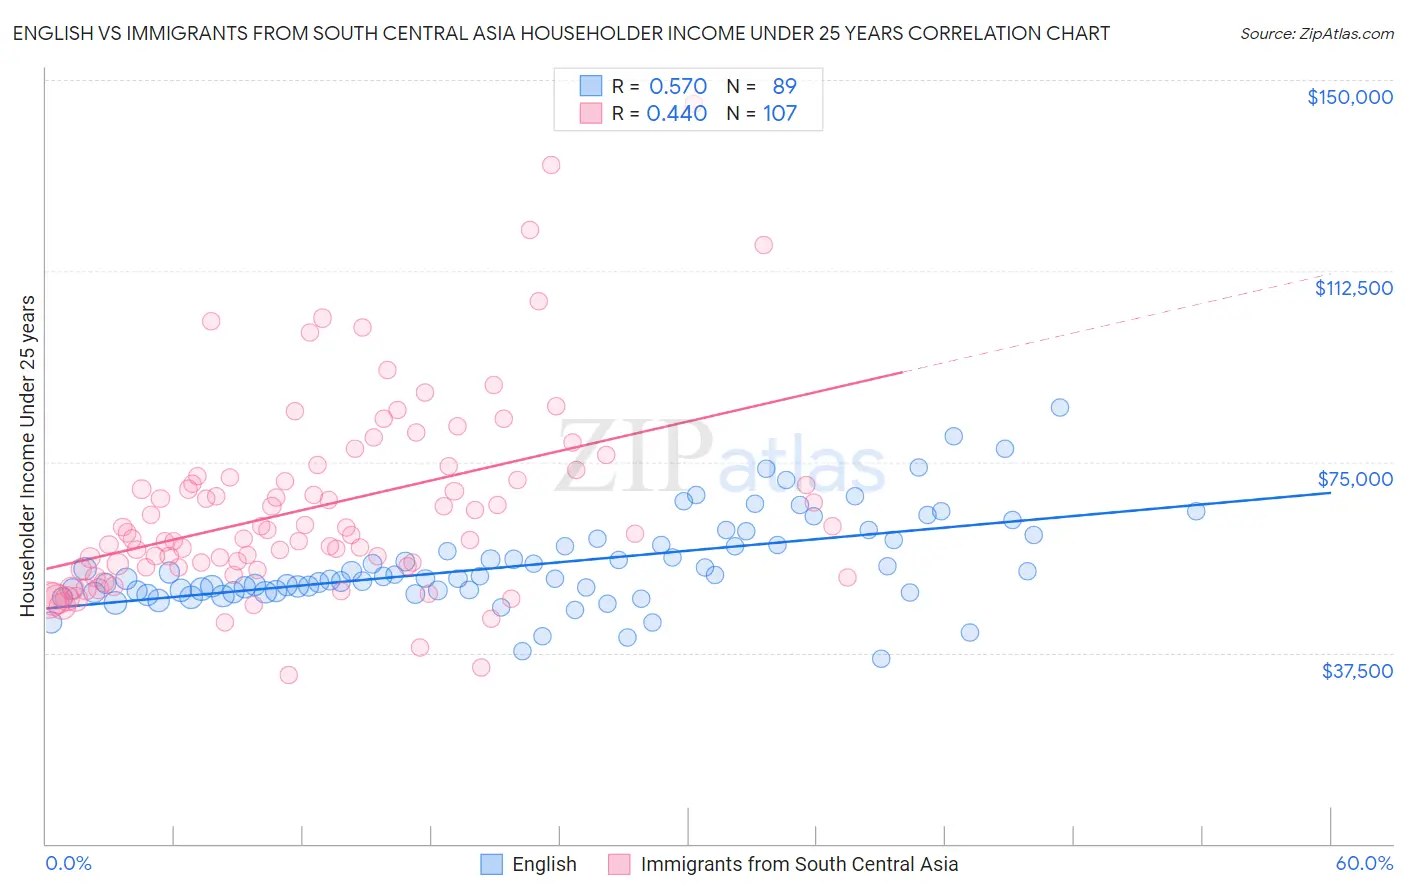 English vs Immigrants from South Central Asia Householder Income Under 25 years